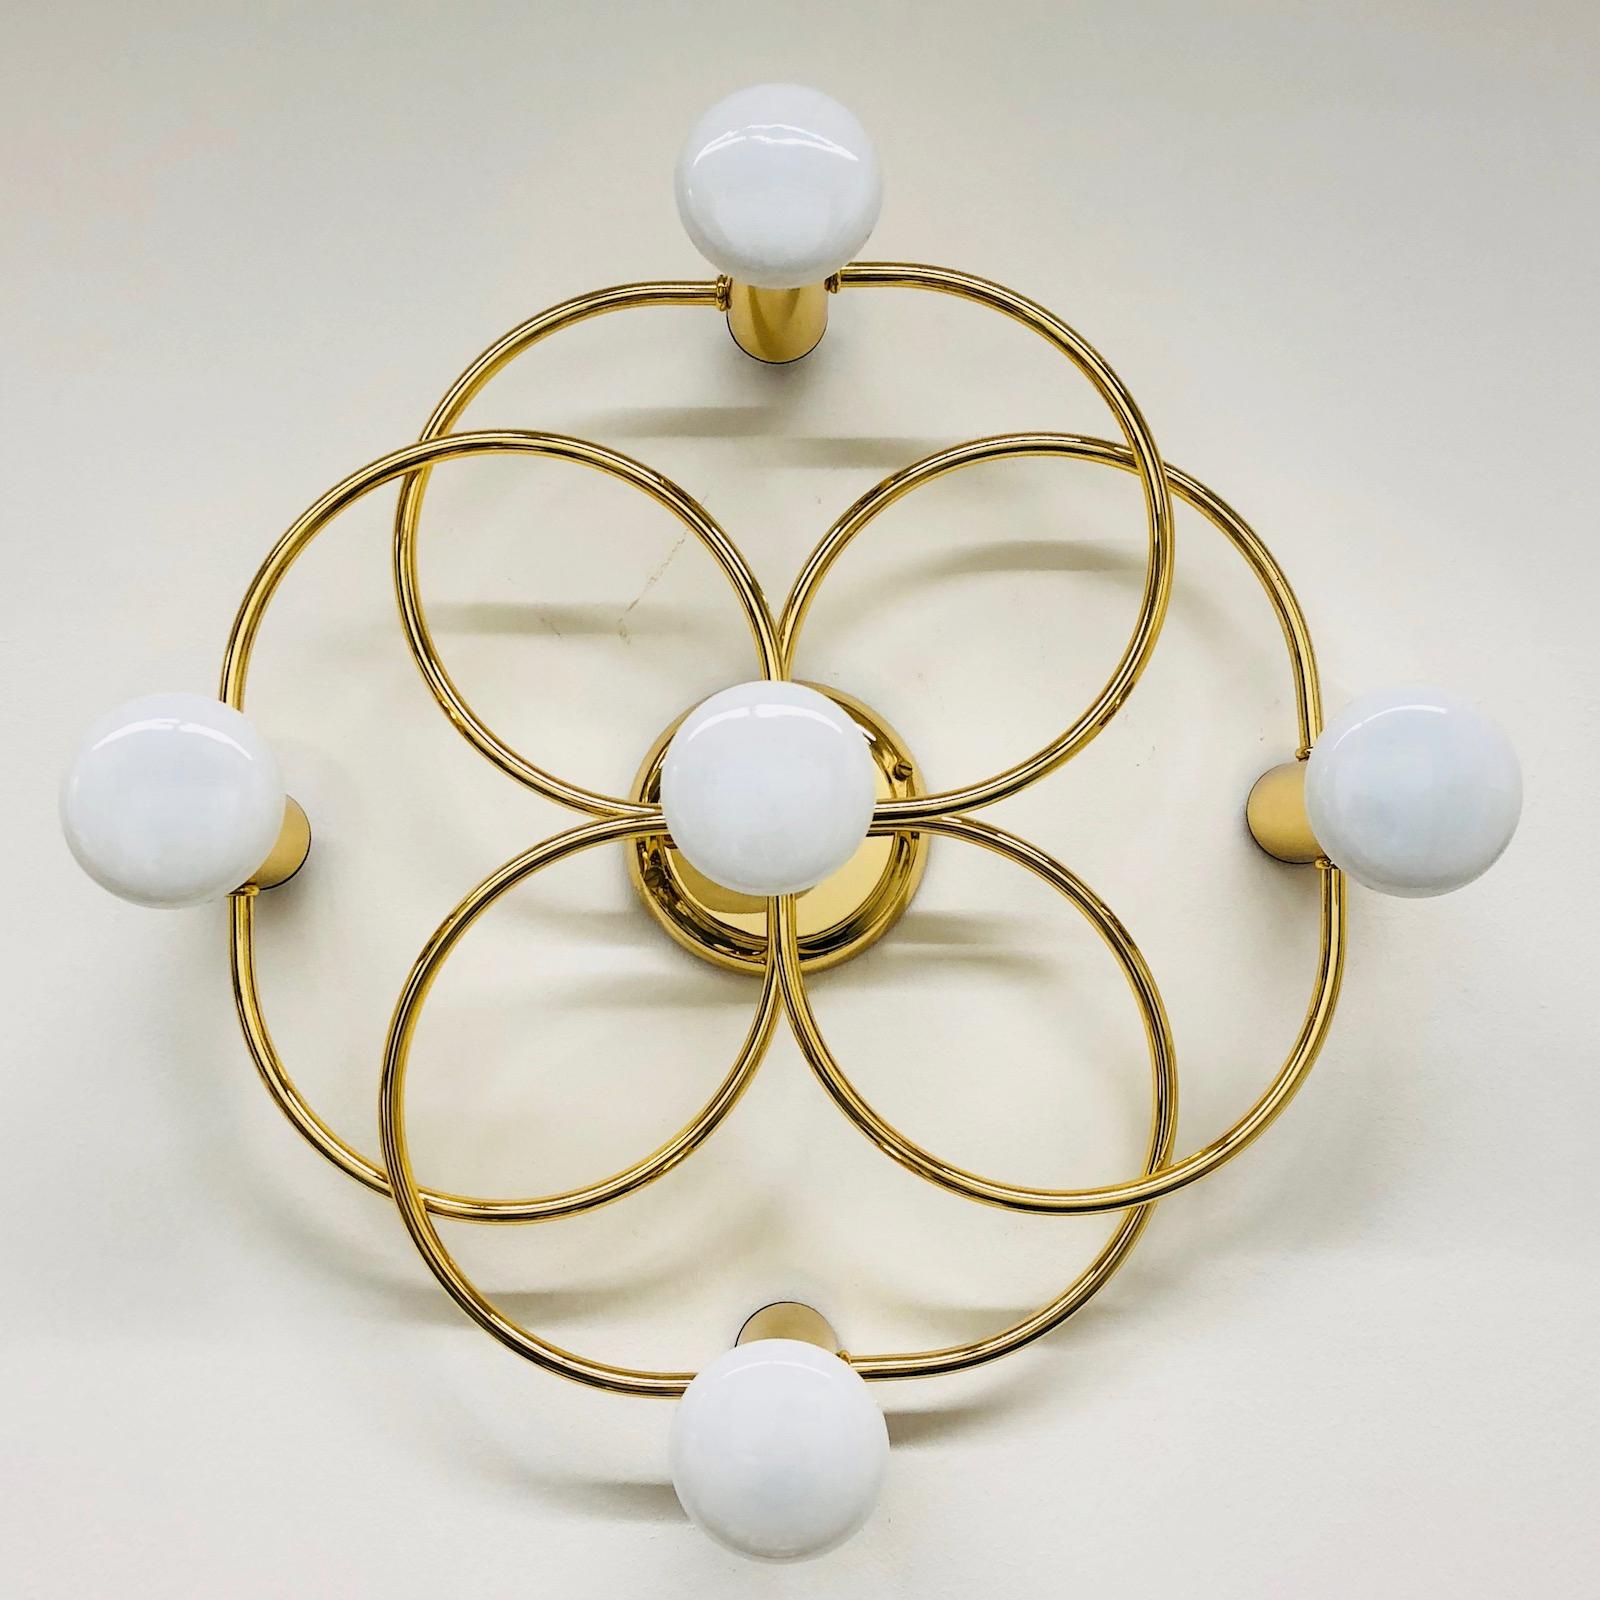 A gorgeous brass flush mount by Leola Leuchten. It can be used also as a sconce. The light fixture requires five European E14 candelabra bulbs, each up to 40 watts. It measures approx. 4 1/2